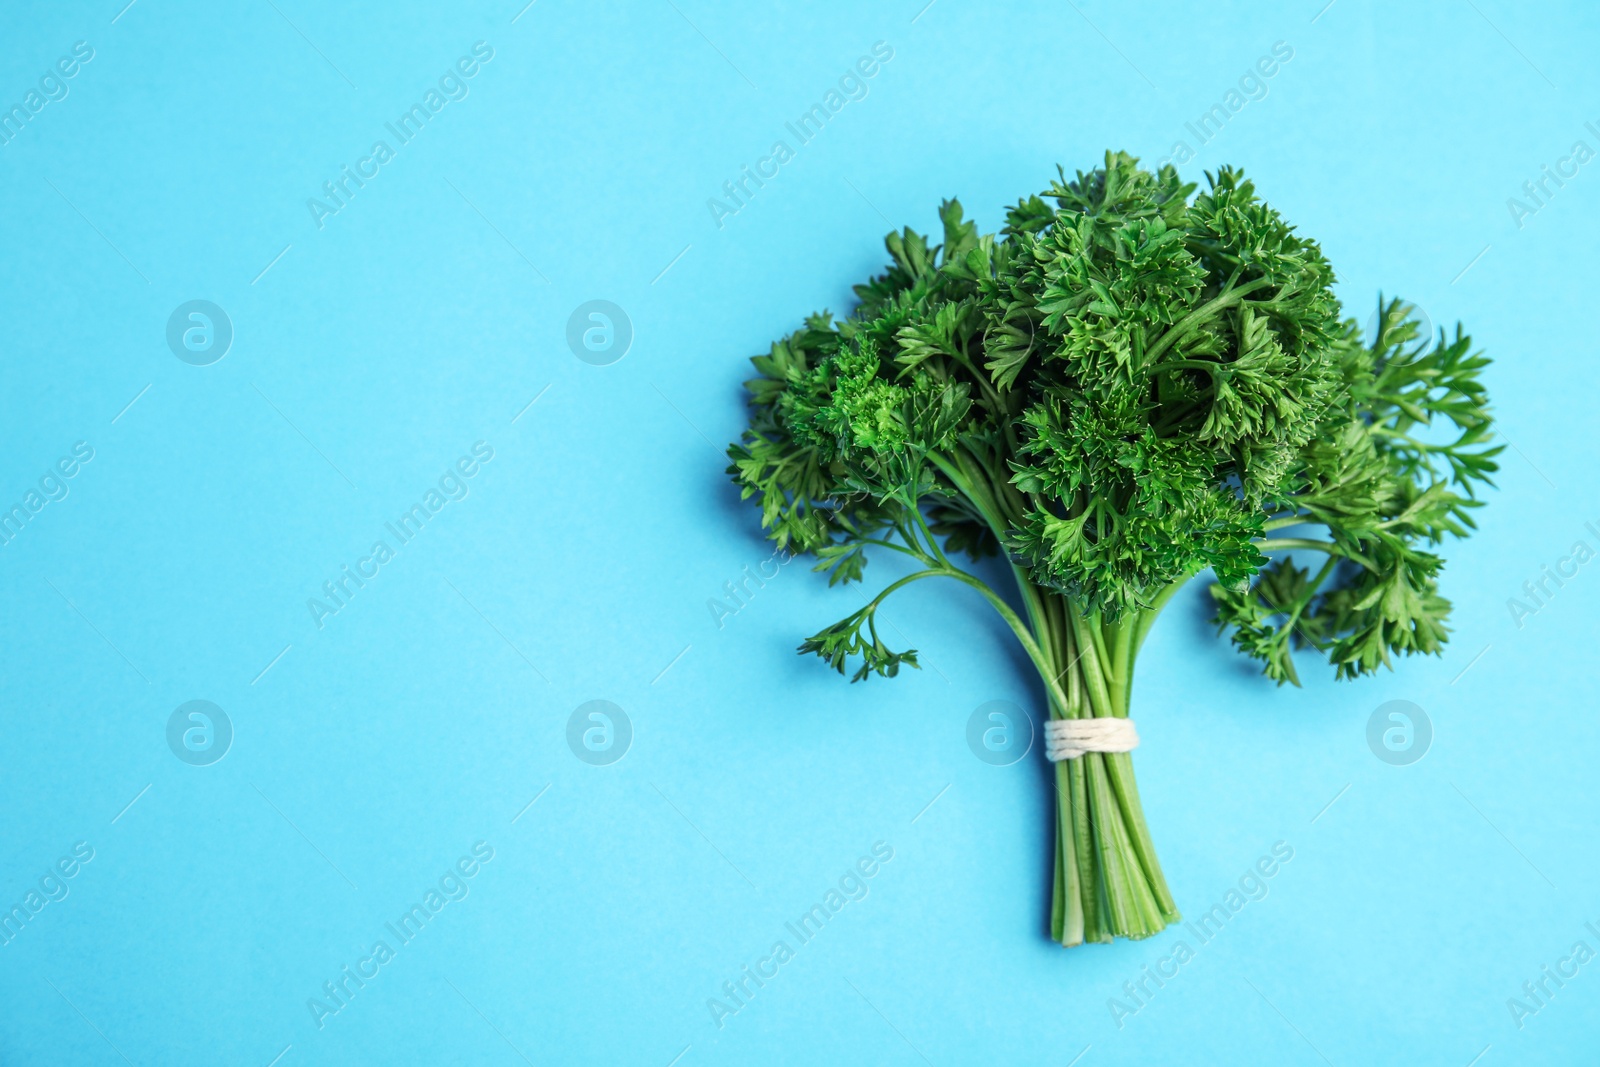 Photo of Bunch of fresh green parsley on blue background, top view. Space for text